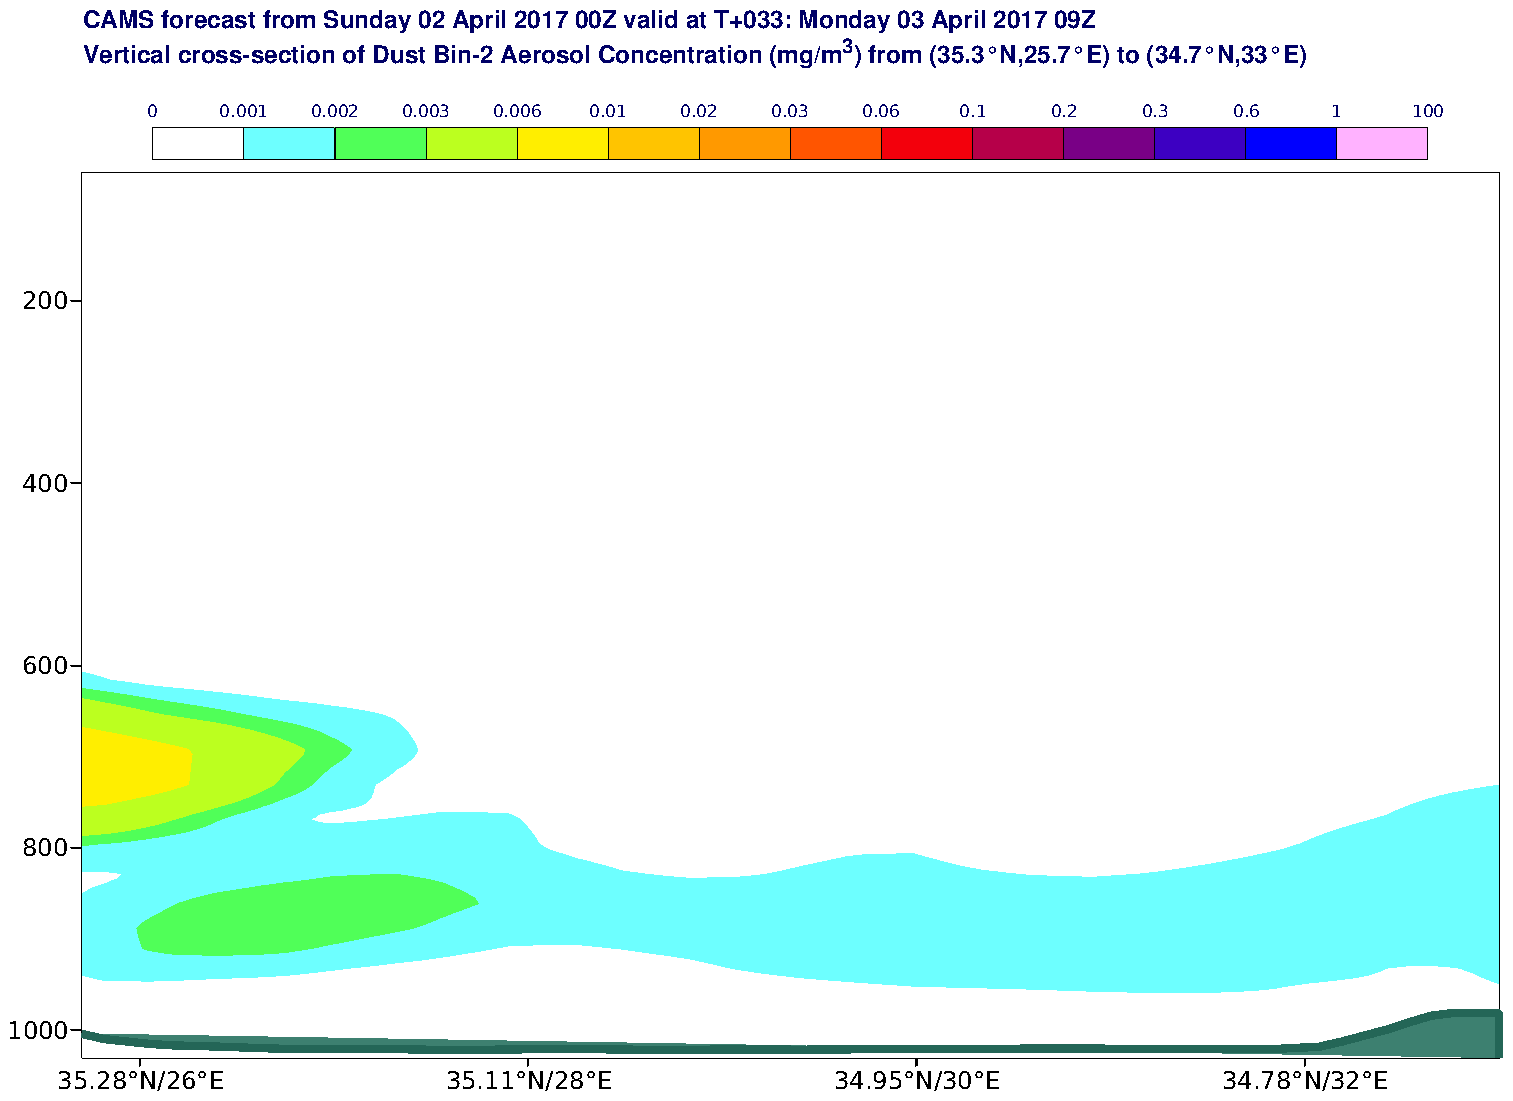 Vertical cross-section of Dust Bin-2 Aerosol Concentration (mg/m3) valid at T33 - 2017-04-03 09:00